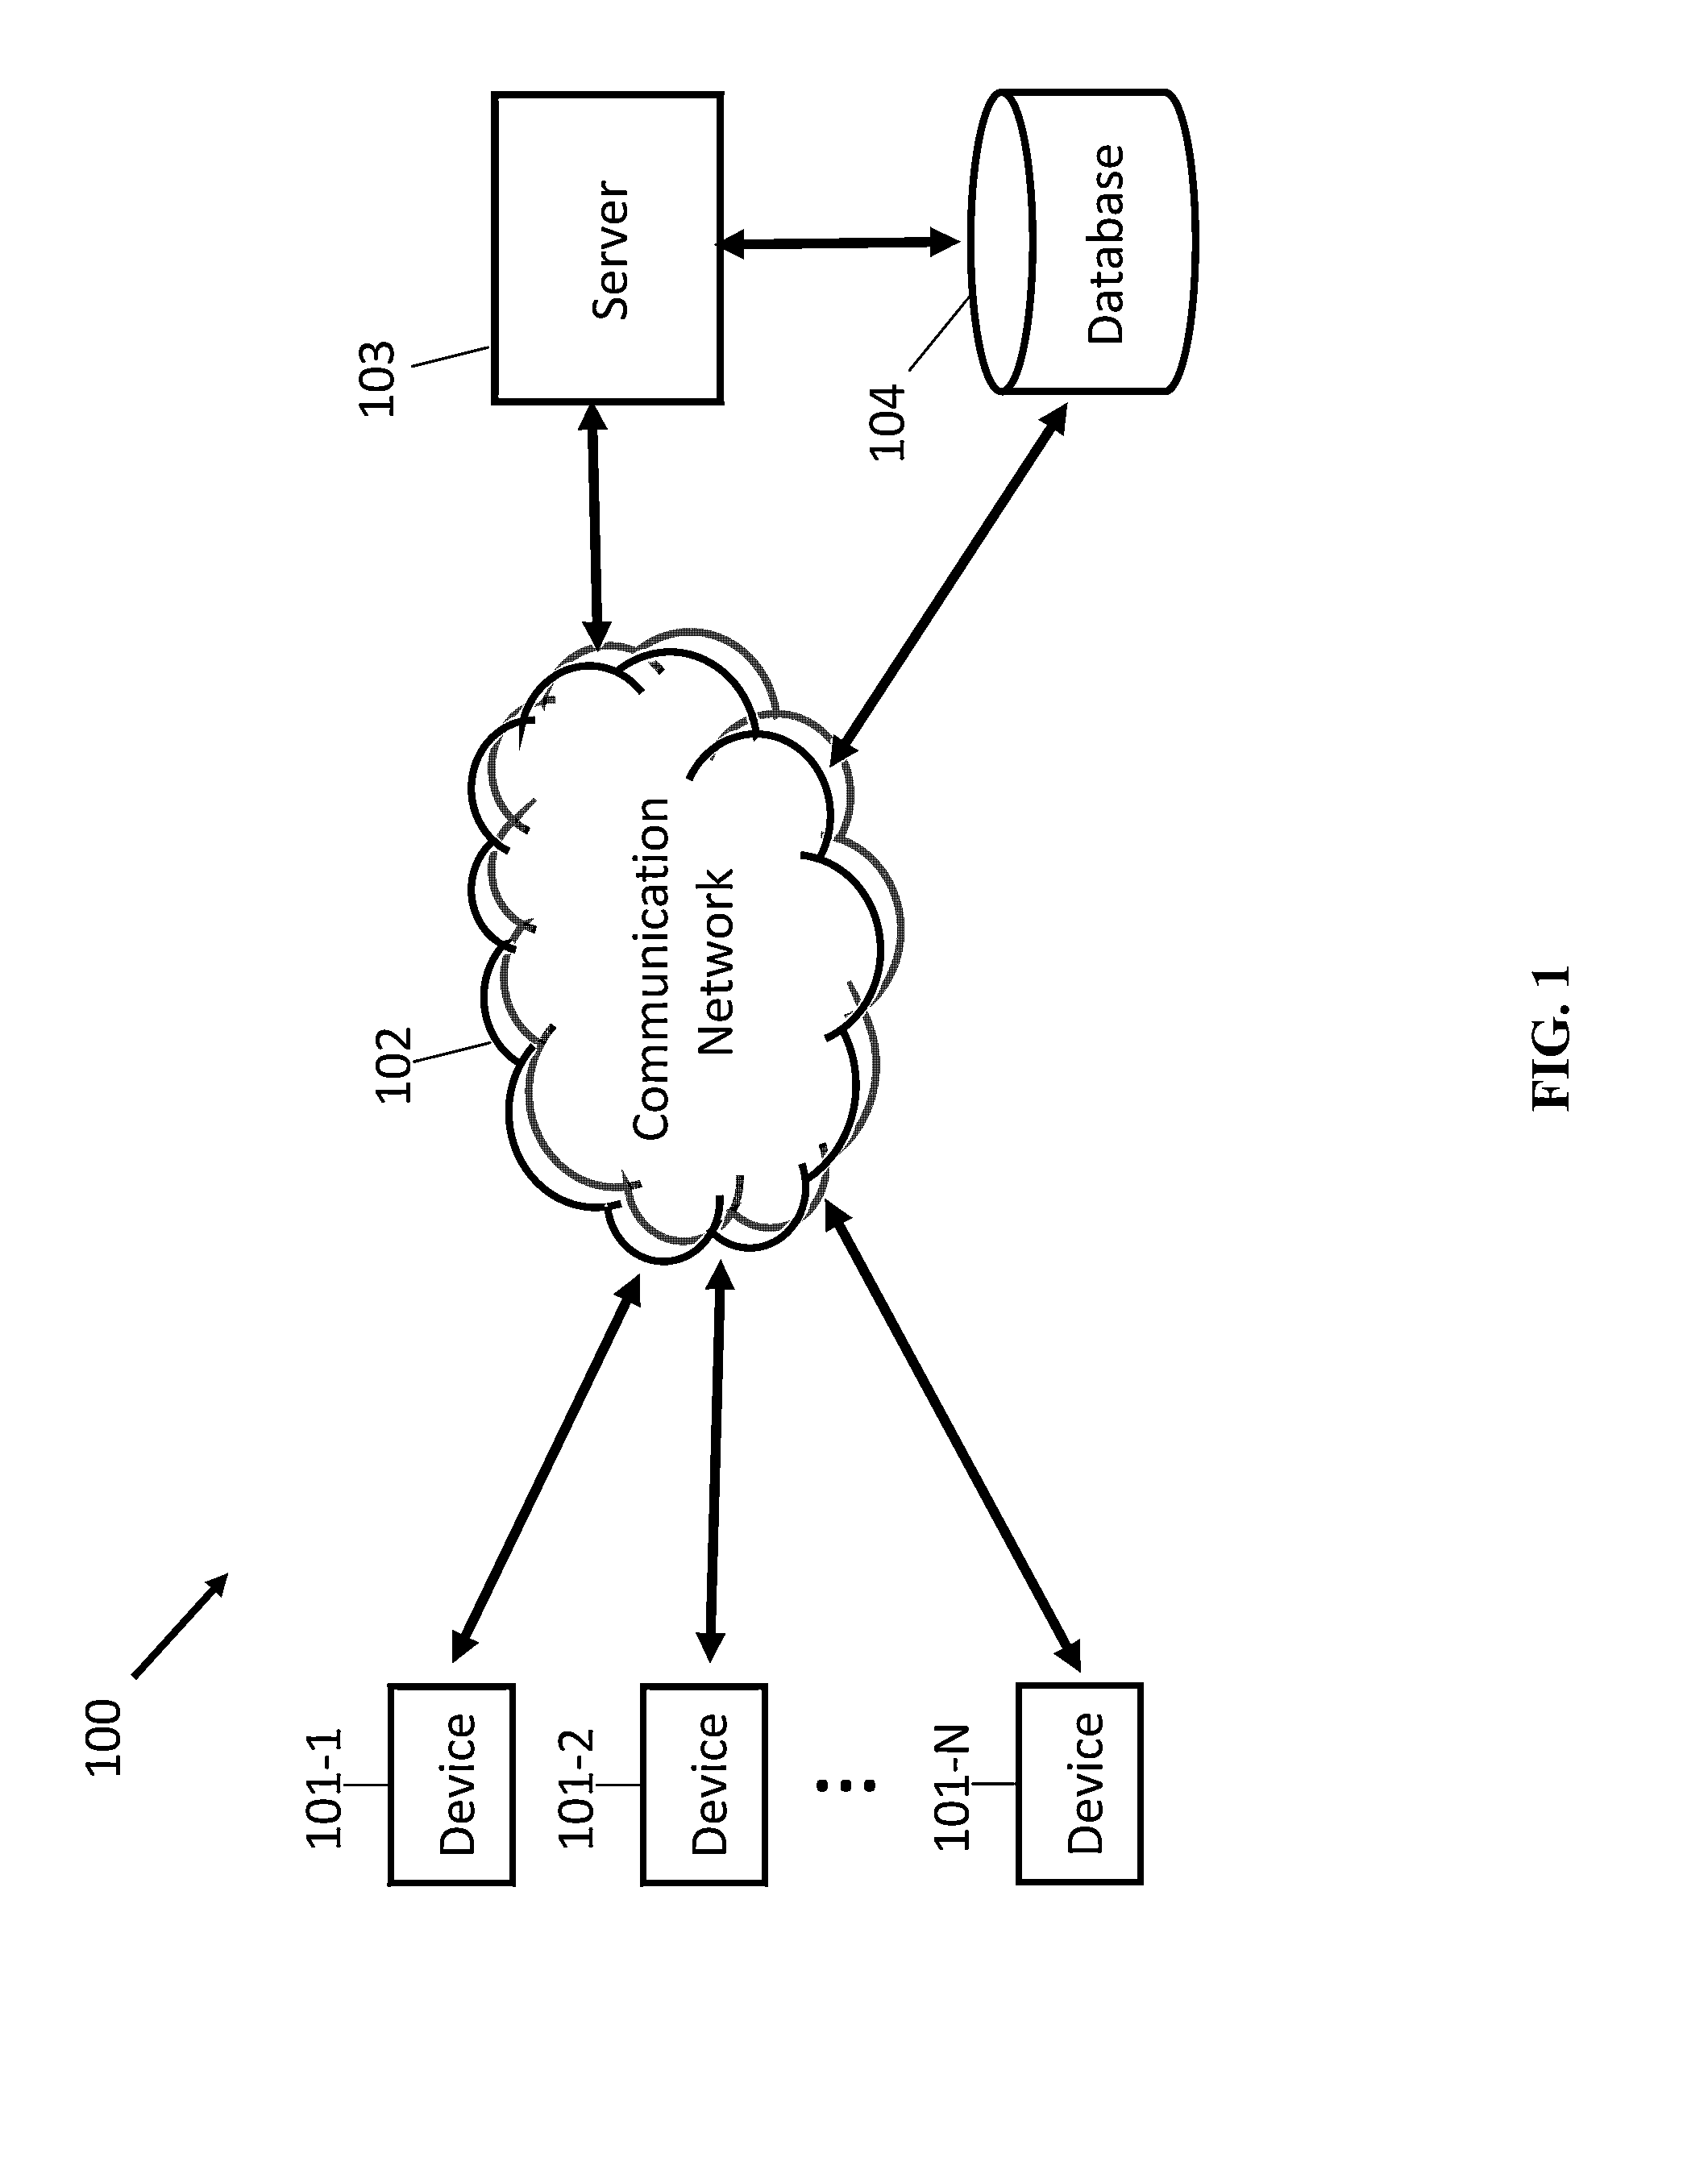 Systems and methods for providing data-driven document suggestions